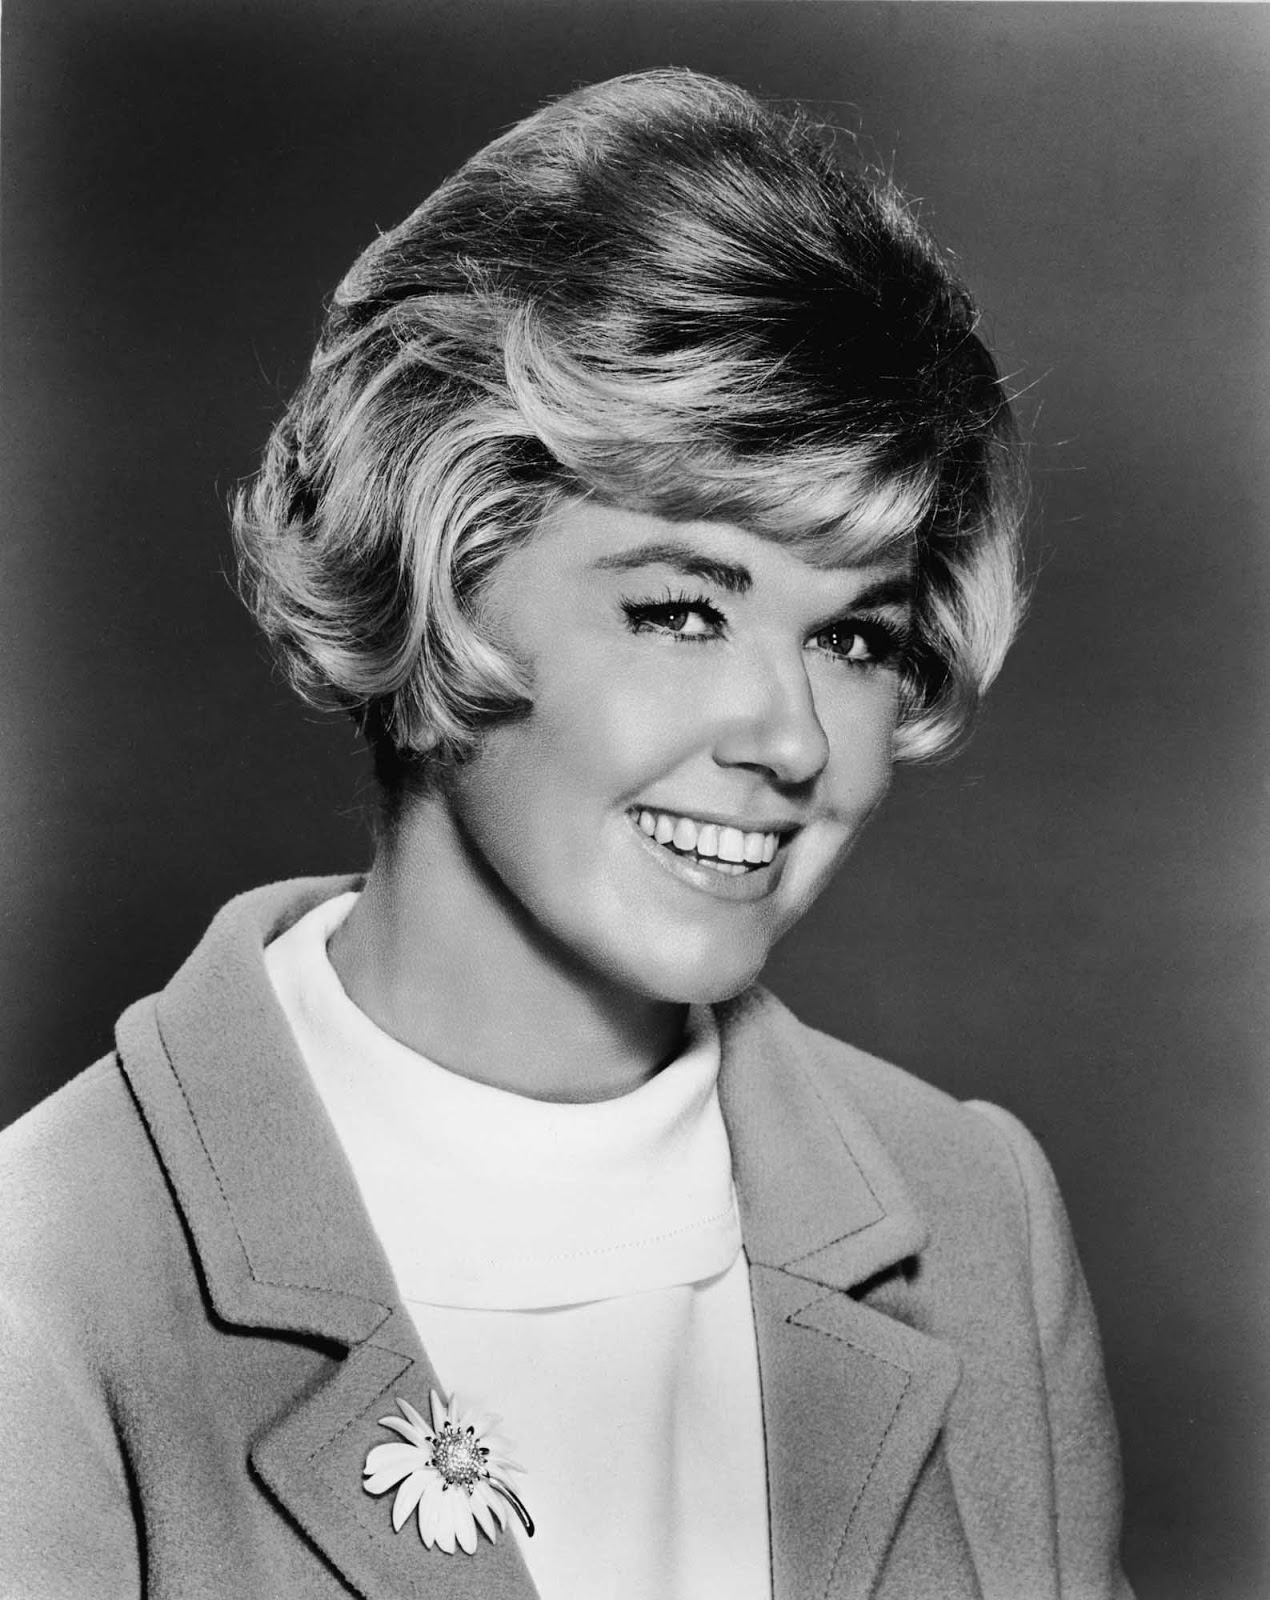 THE BOOKSTEVE CHANNEL: Happy Birthday to Doris Day